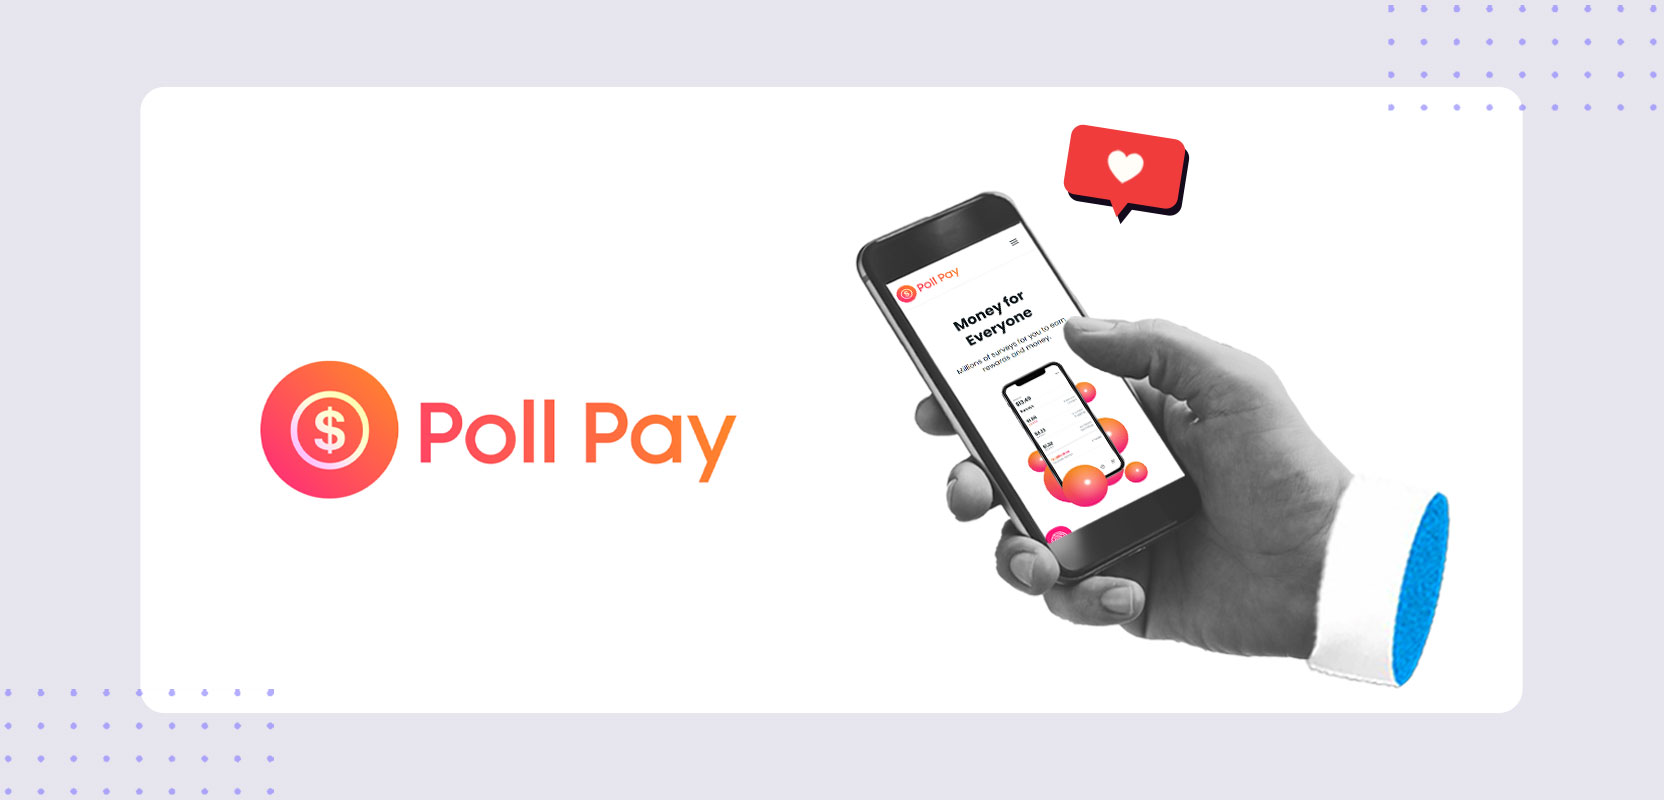 Smartphone next to Poll Pay logo